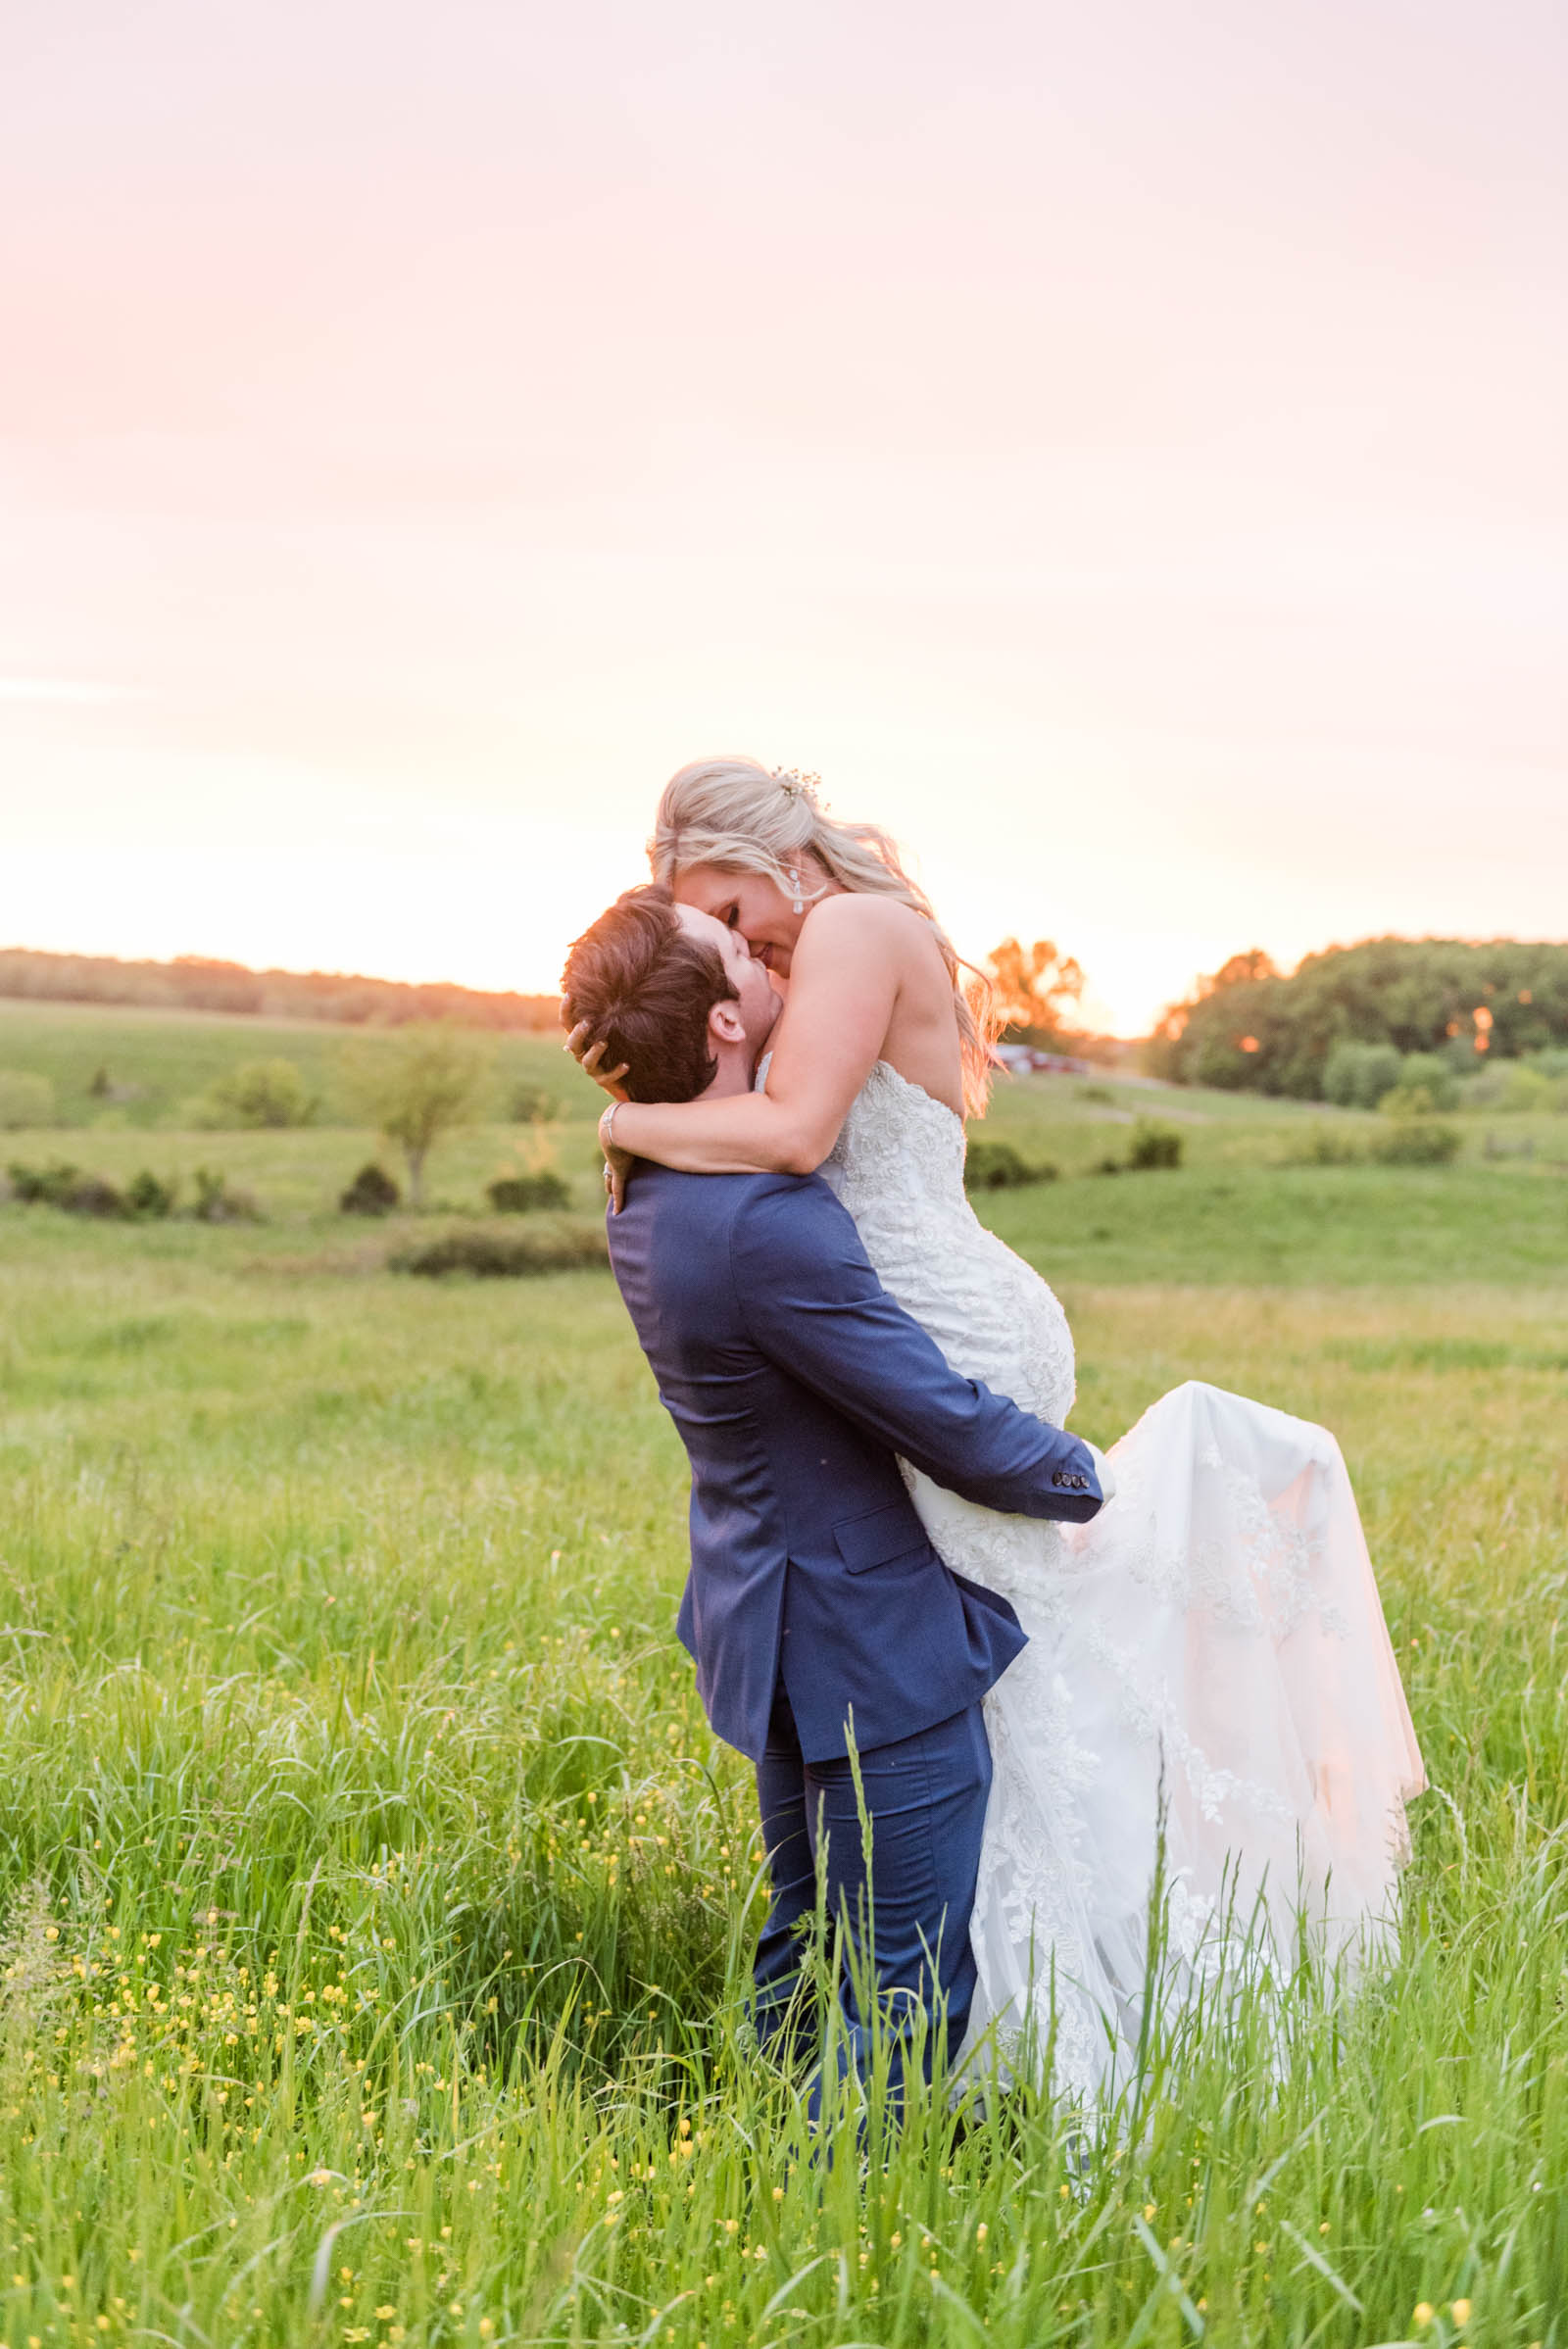 Romantic Southern Wedding At Duck Pond Manor Sparta, Tennessee Sweet Williams Photography, Rebecca Musayev